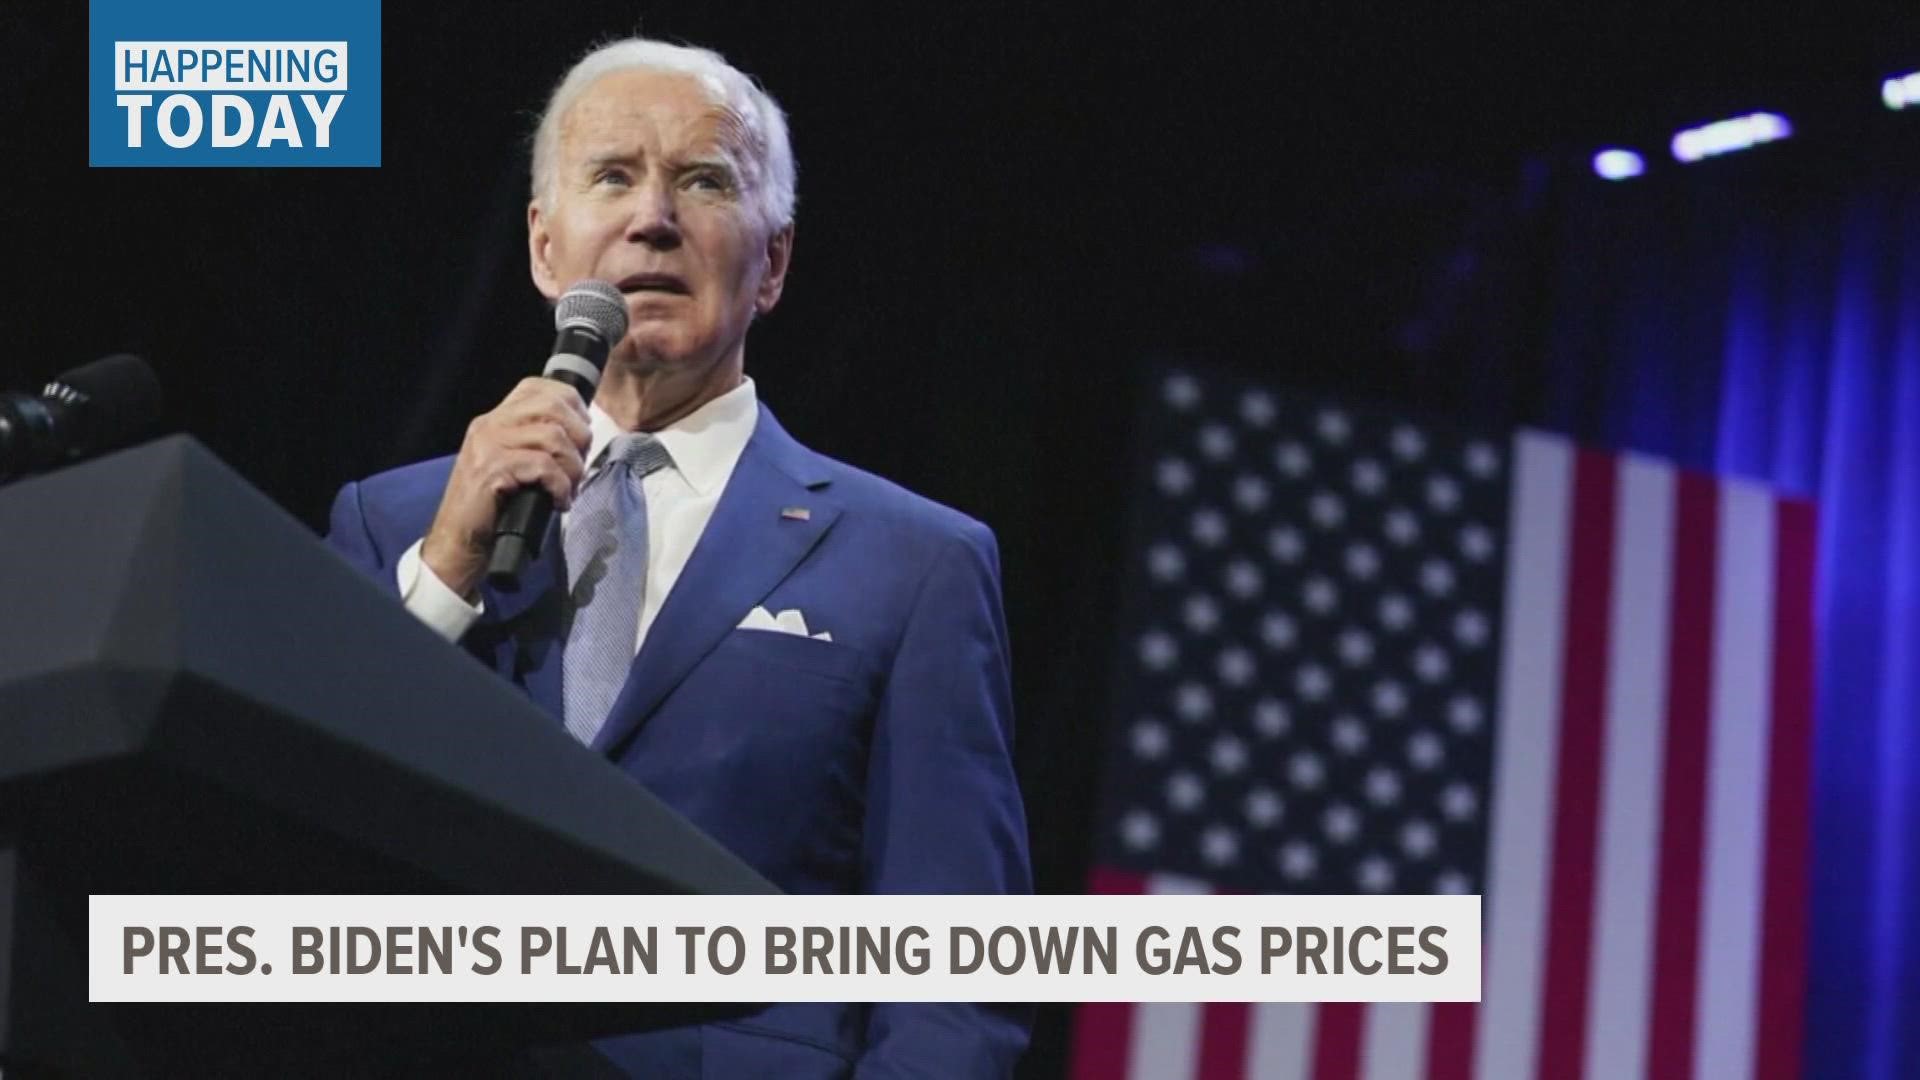 President Biden will announce the drawdown from the U.S. strategic reserve as part of a response to recent production cuts announced by OPEC+ nations.